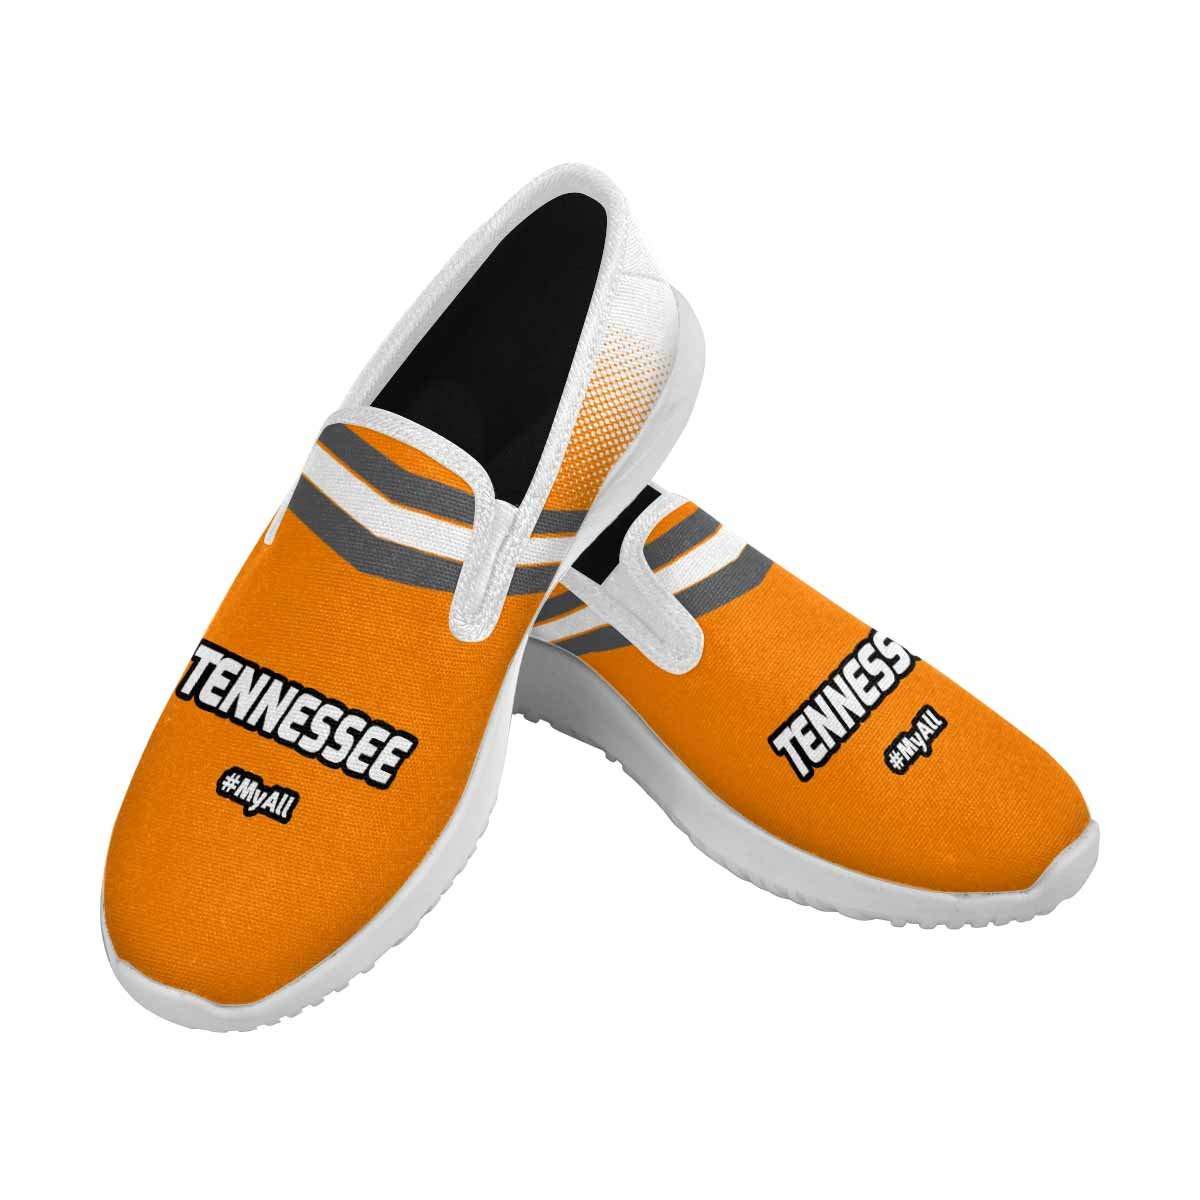 Designs by MyUtopia Shout Out:Tennesse Fan #MyAll Mens Slip-on Canvas Sneakers